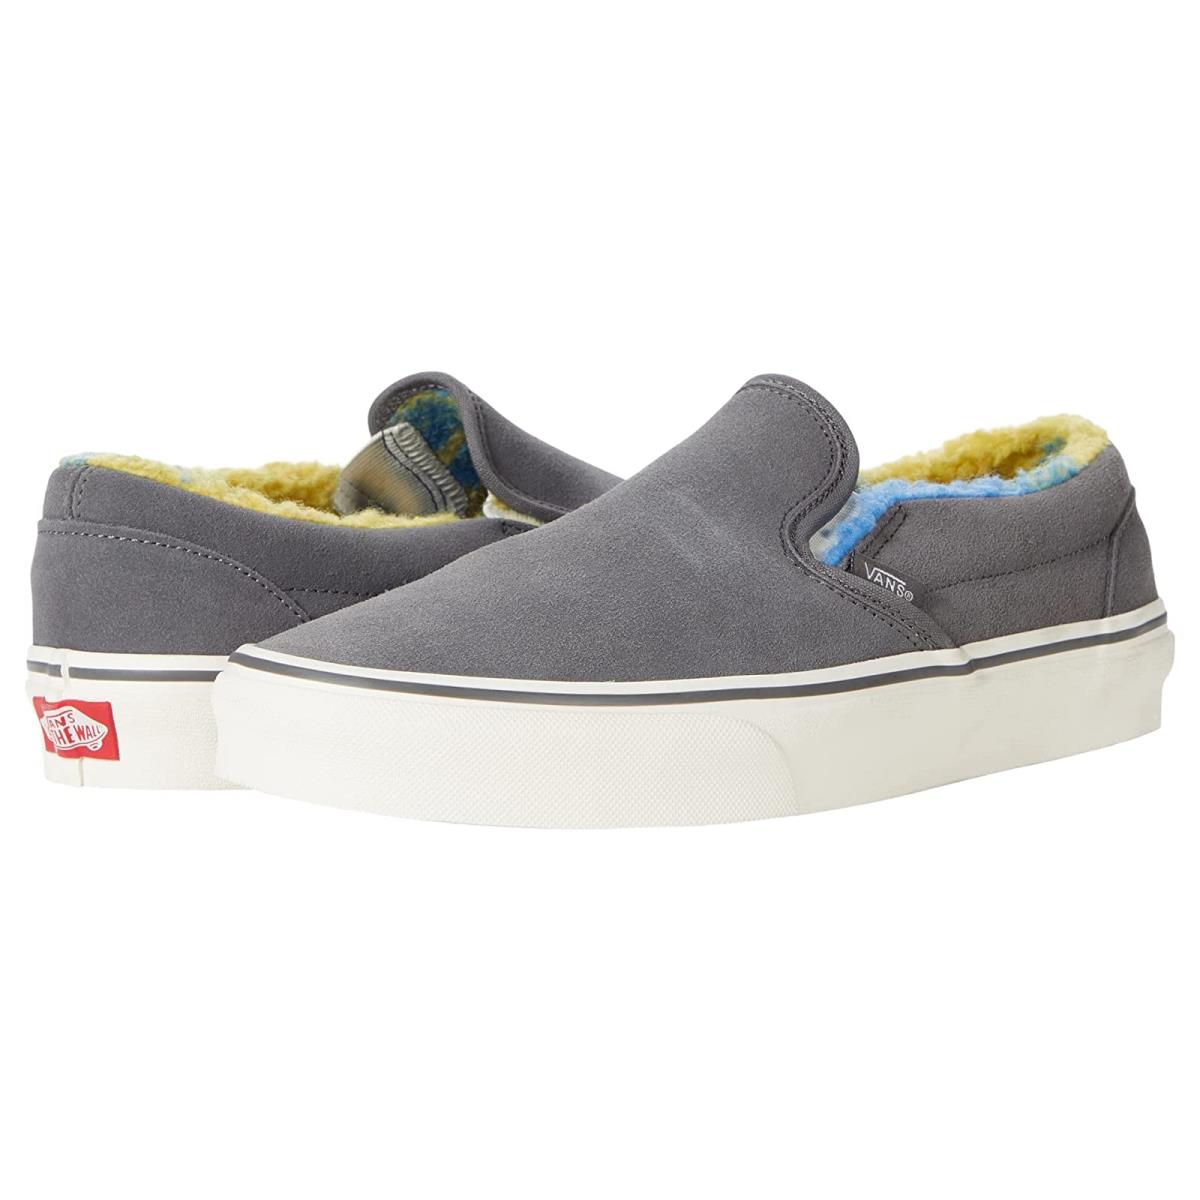 Unisex Sneakers Athletic Shoes Vans Classic Slip-on Sherpa Pewter/Marshmallow